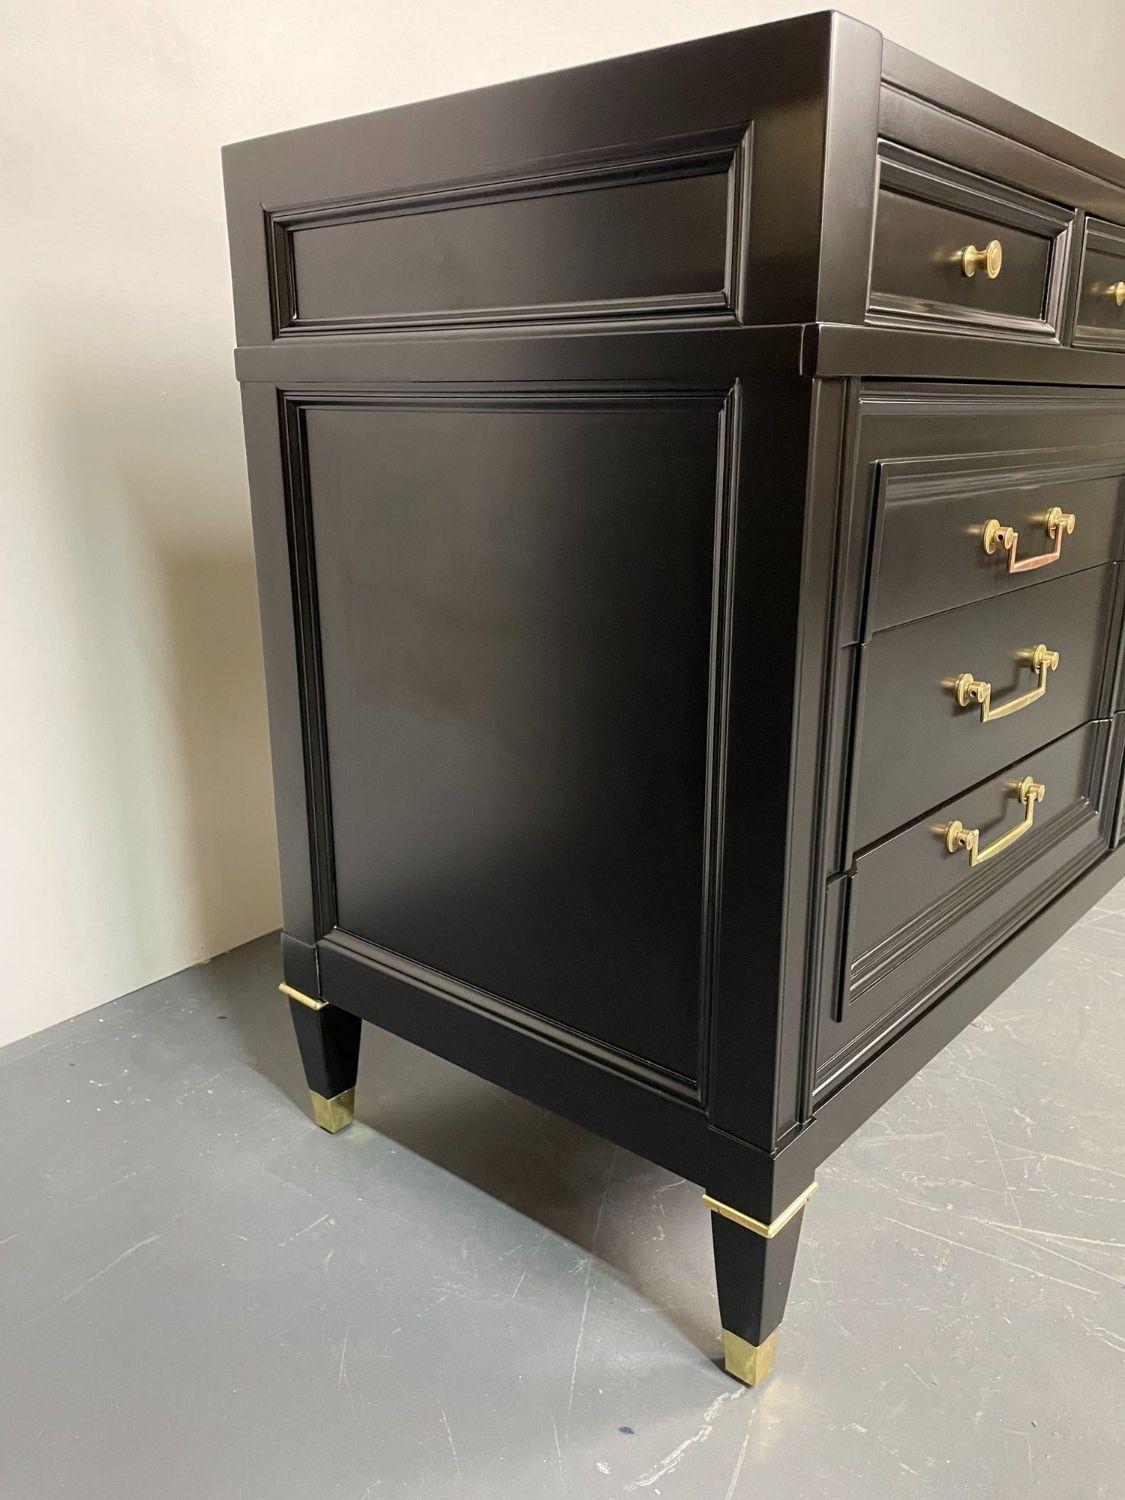 Hollywood Regency Ebony Dresser, 12 Drawer, Refinished, Circa 1960s In Good Condition For Sale In Stamford, CT